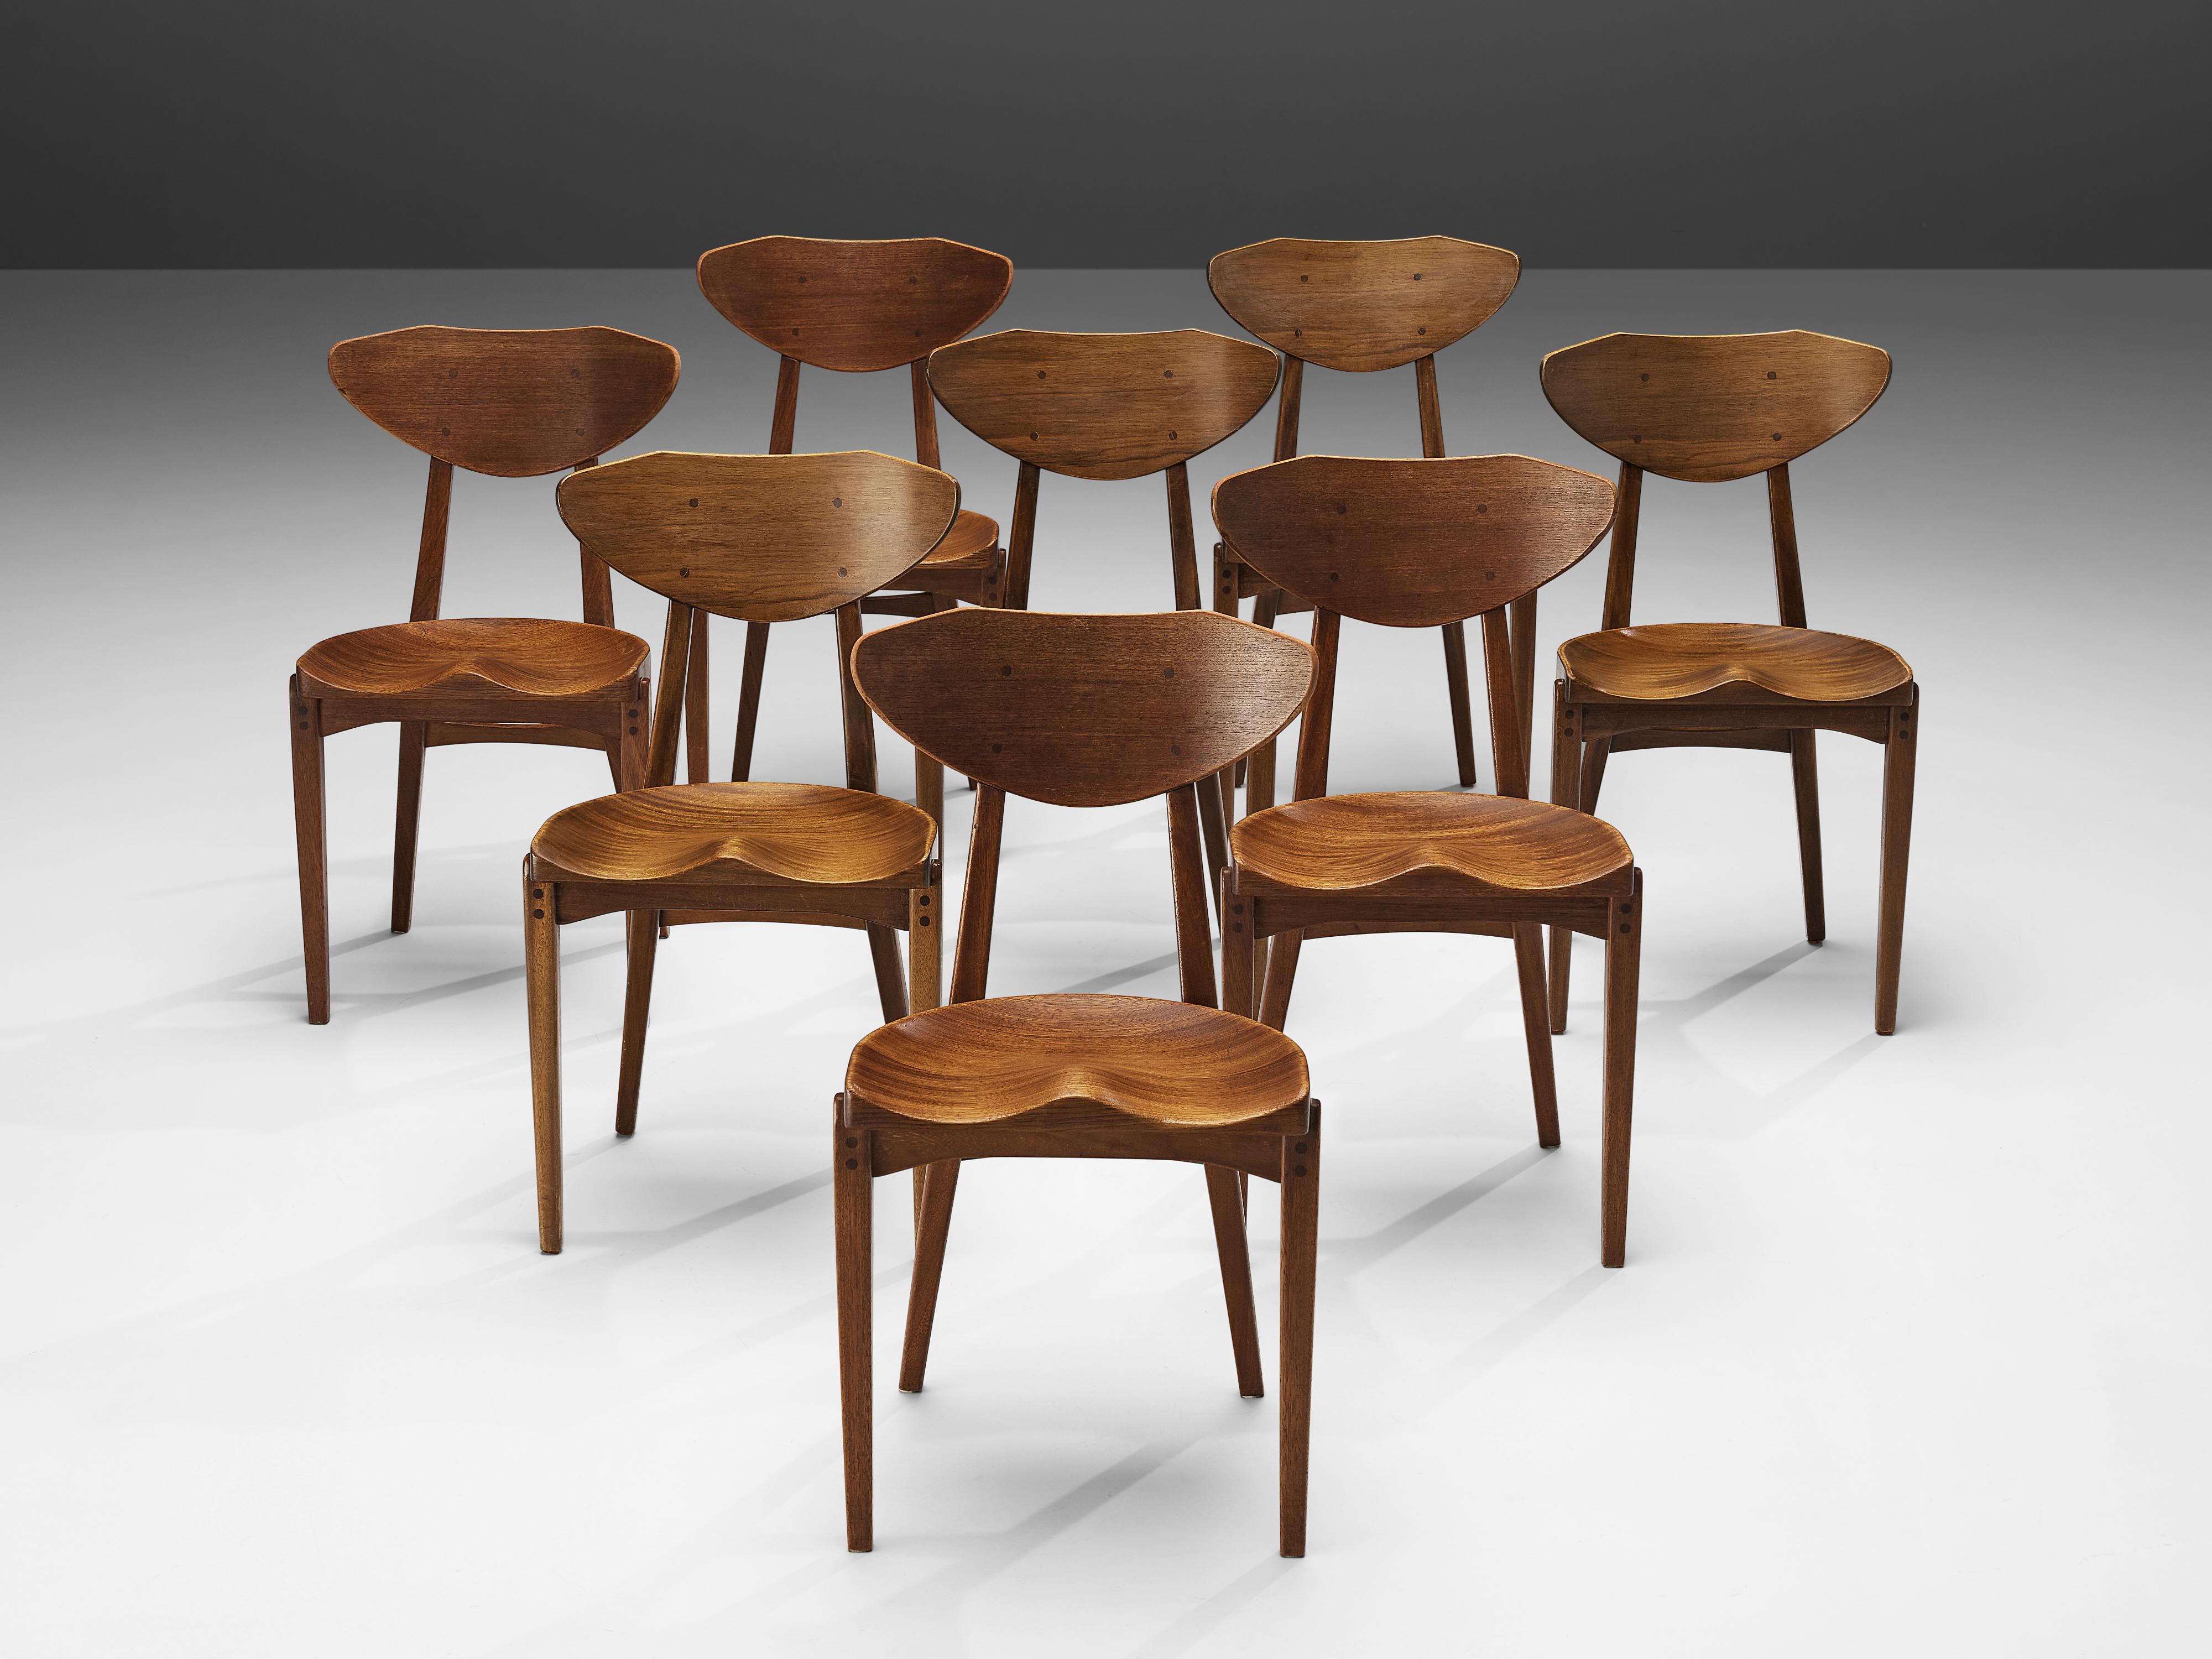 Richard Jensen and Kjaerulff Rasmussen, set of eight dining chairs, mahogany, Denmark, 1960s.

This striking set of mahogany dining chairs was designed by Richard Jensen and Kjaerulff Rasmussen. What characterizes the chair is the combination of